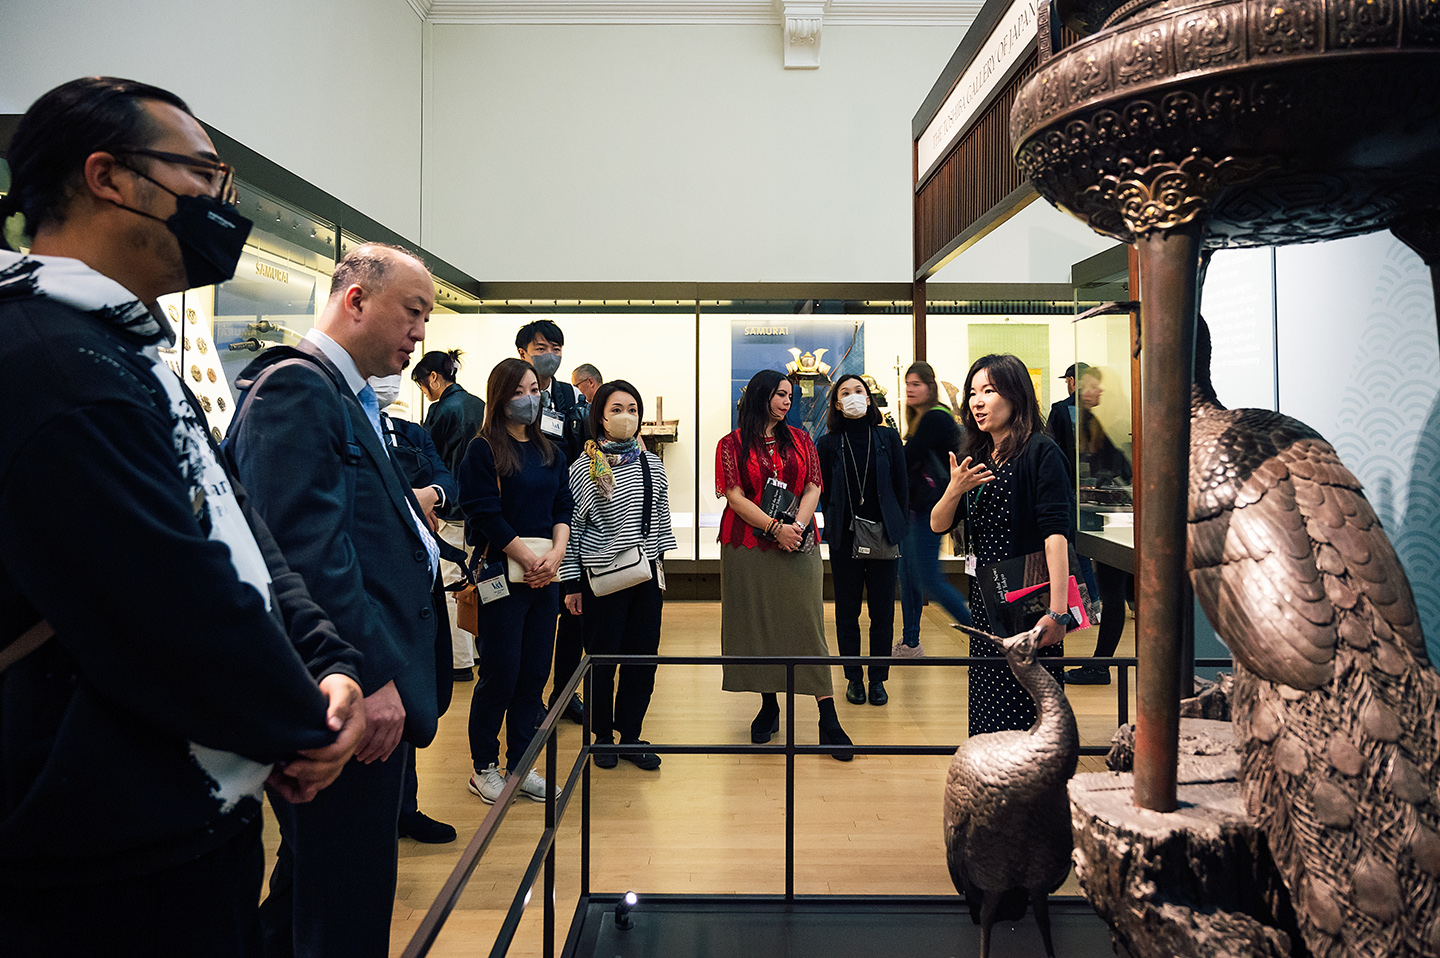 [Vol. 1] Masterclass: Tokyo Crafts, a Collaborative Art Event Held by Tokyo’s Edo Tokyo Kirari Project and Britain’s Victoria and Albert Museum